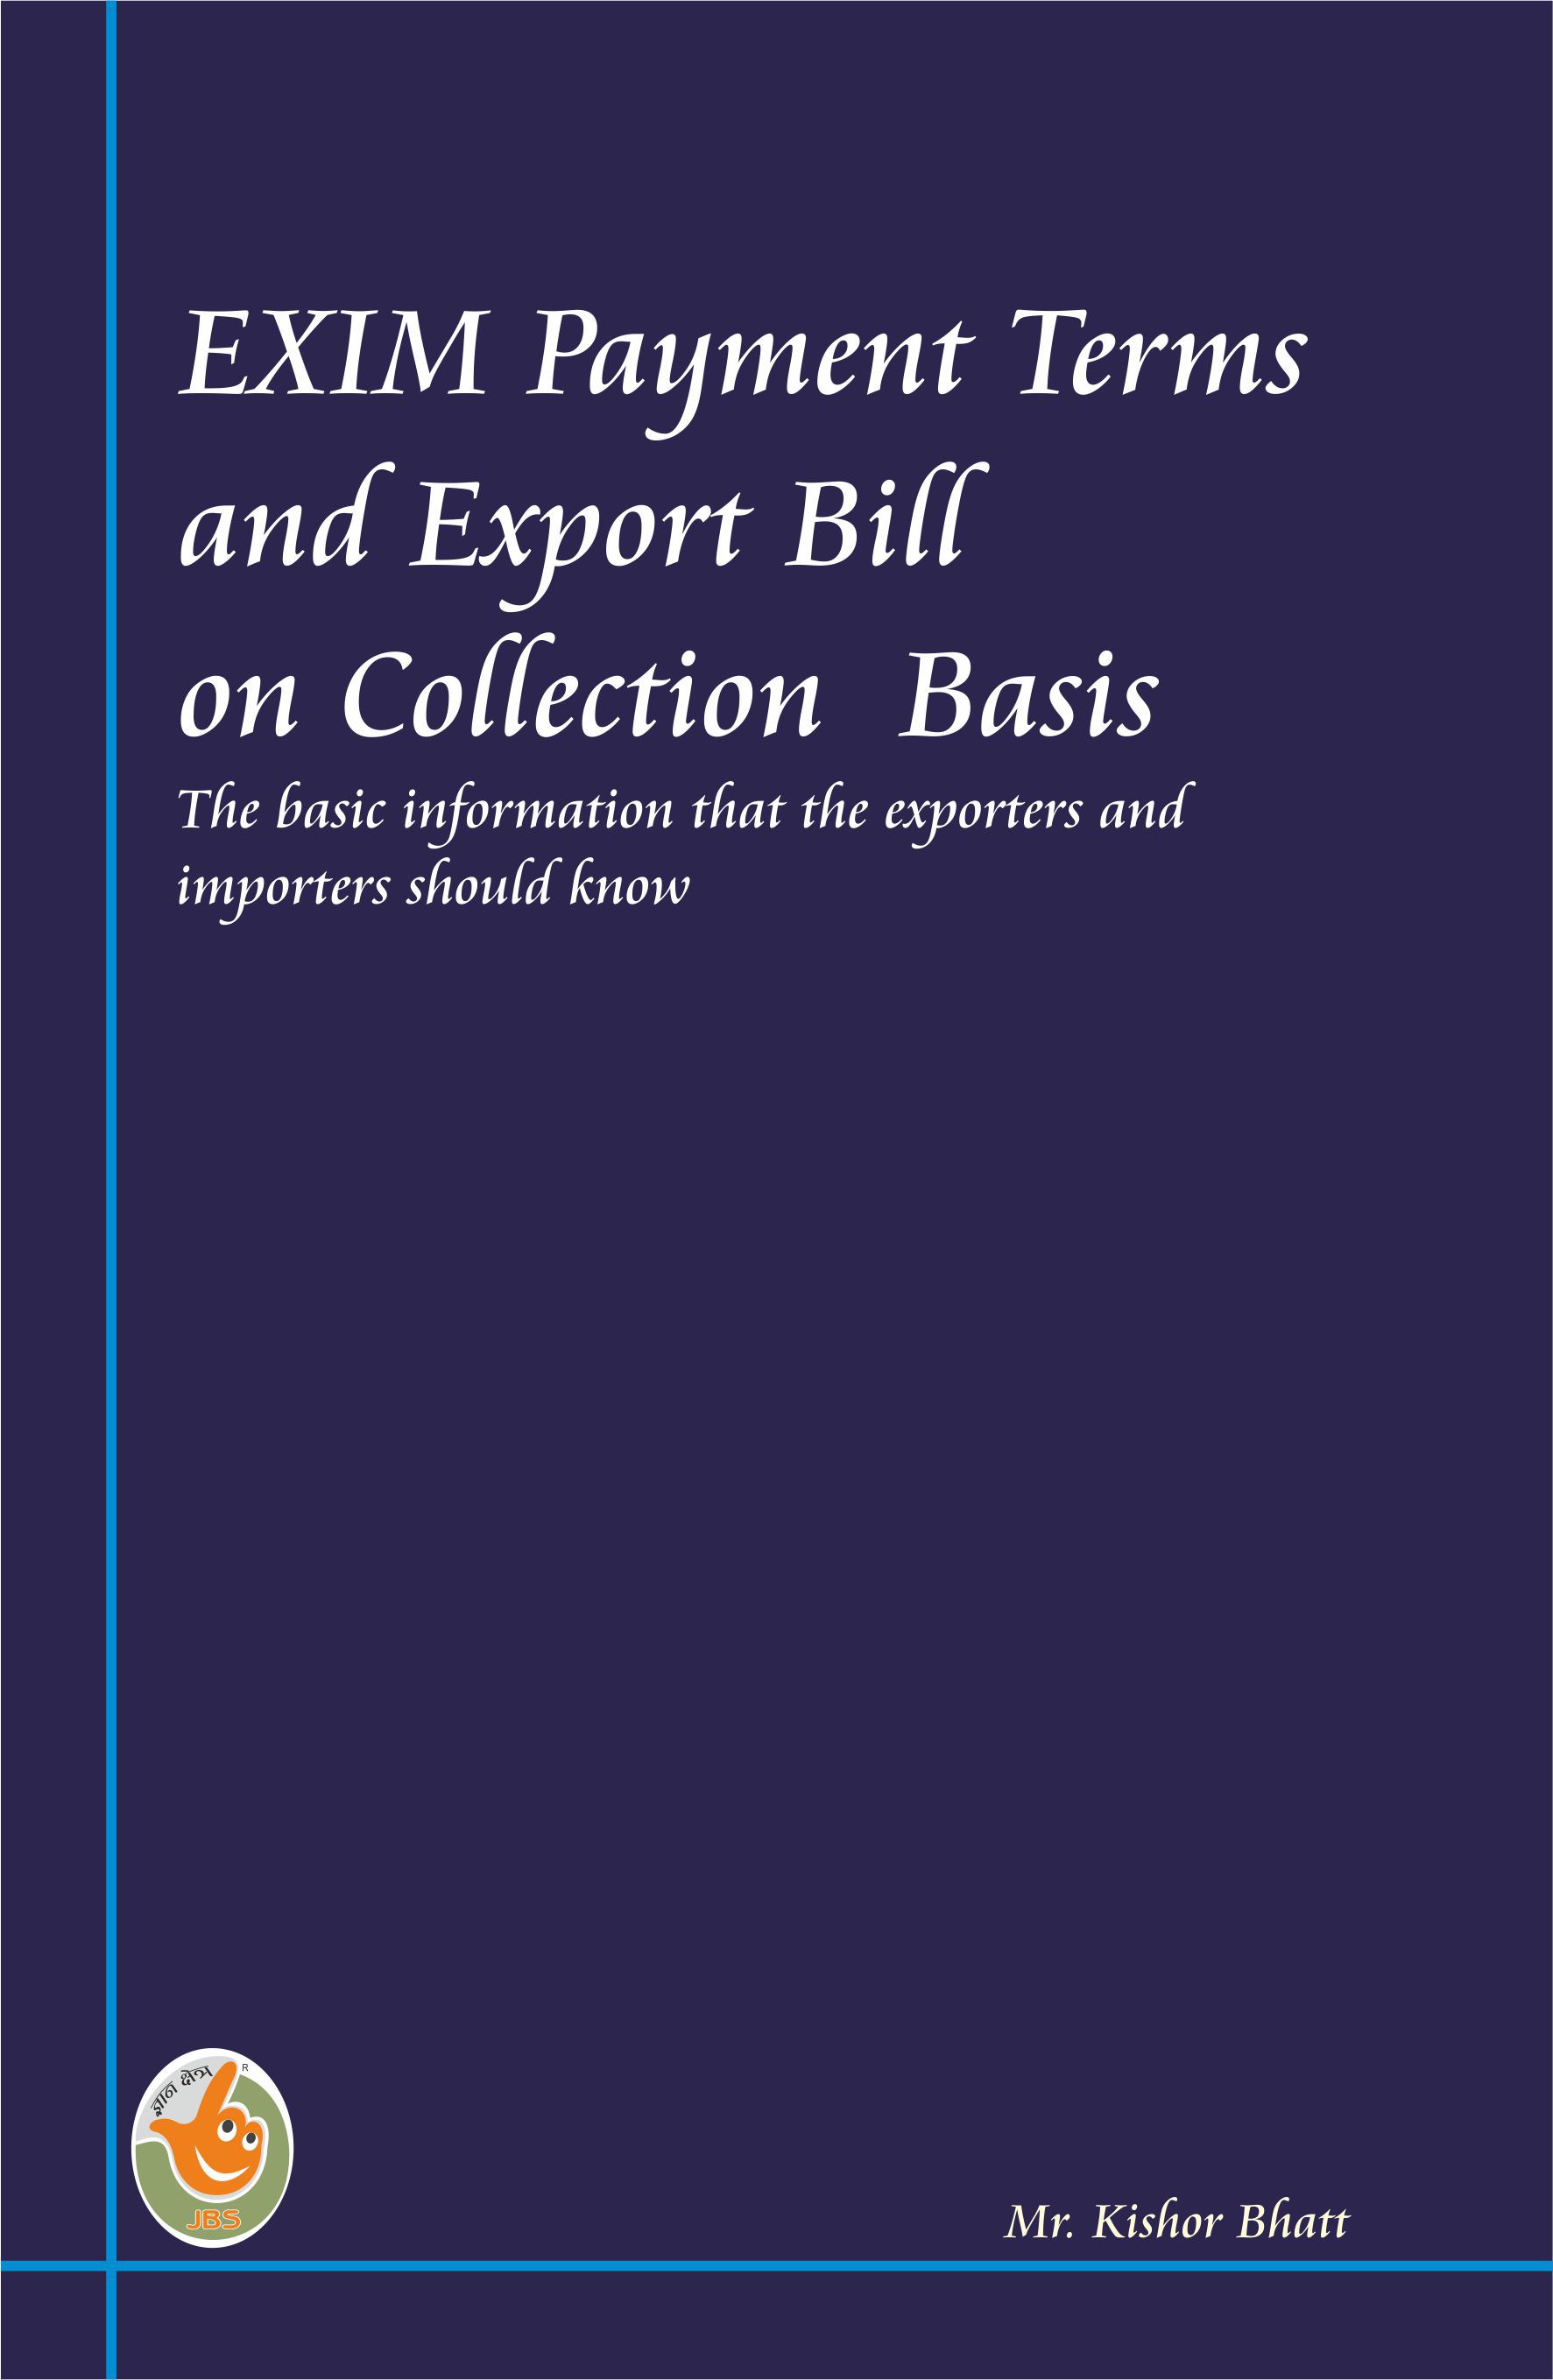 EXIM Payment Terms and Export Bill on Collection Basis 